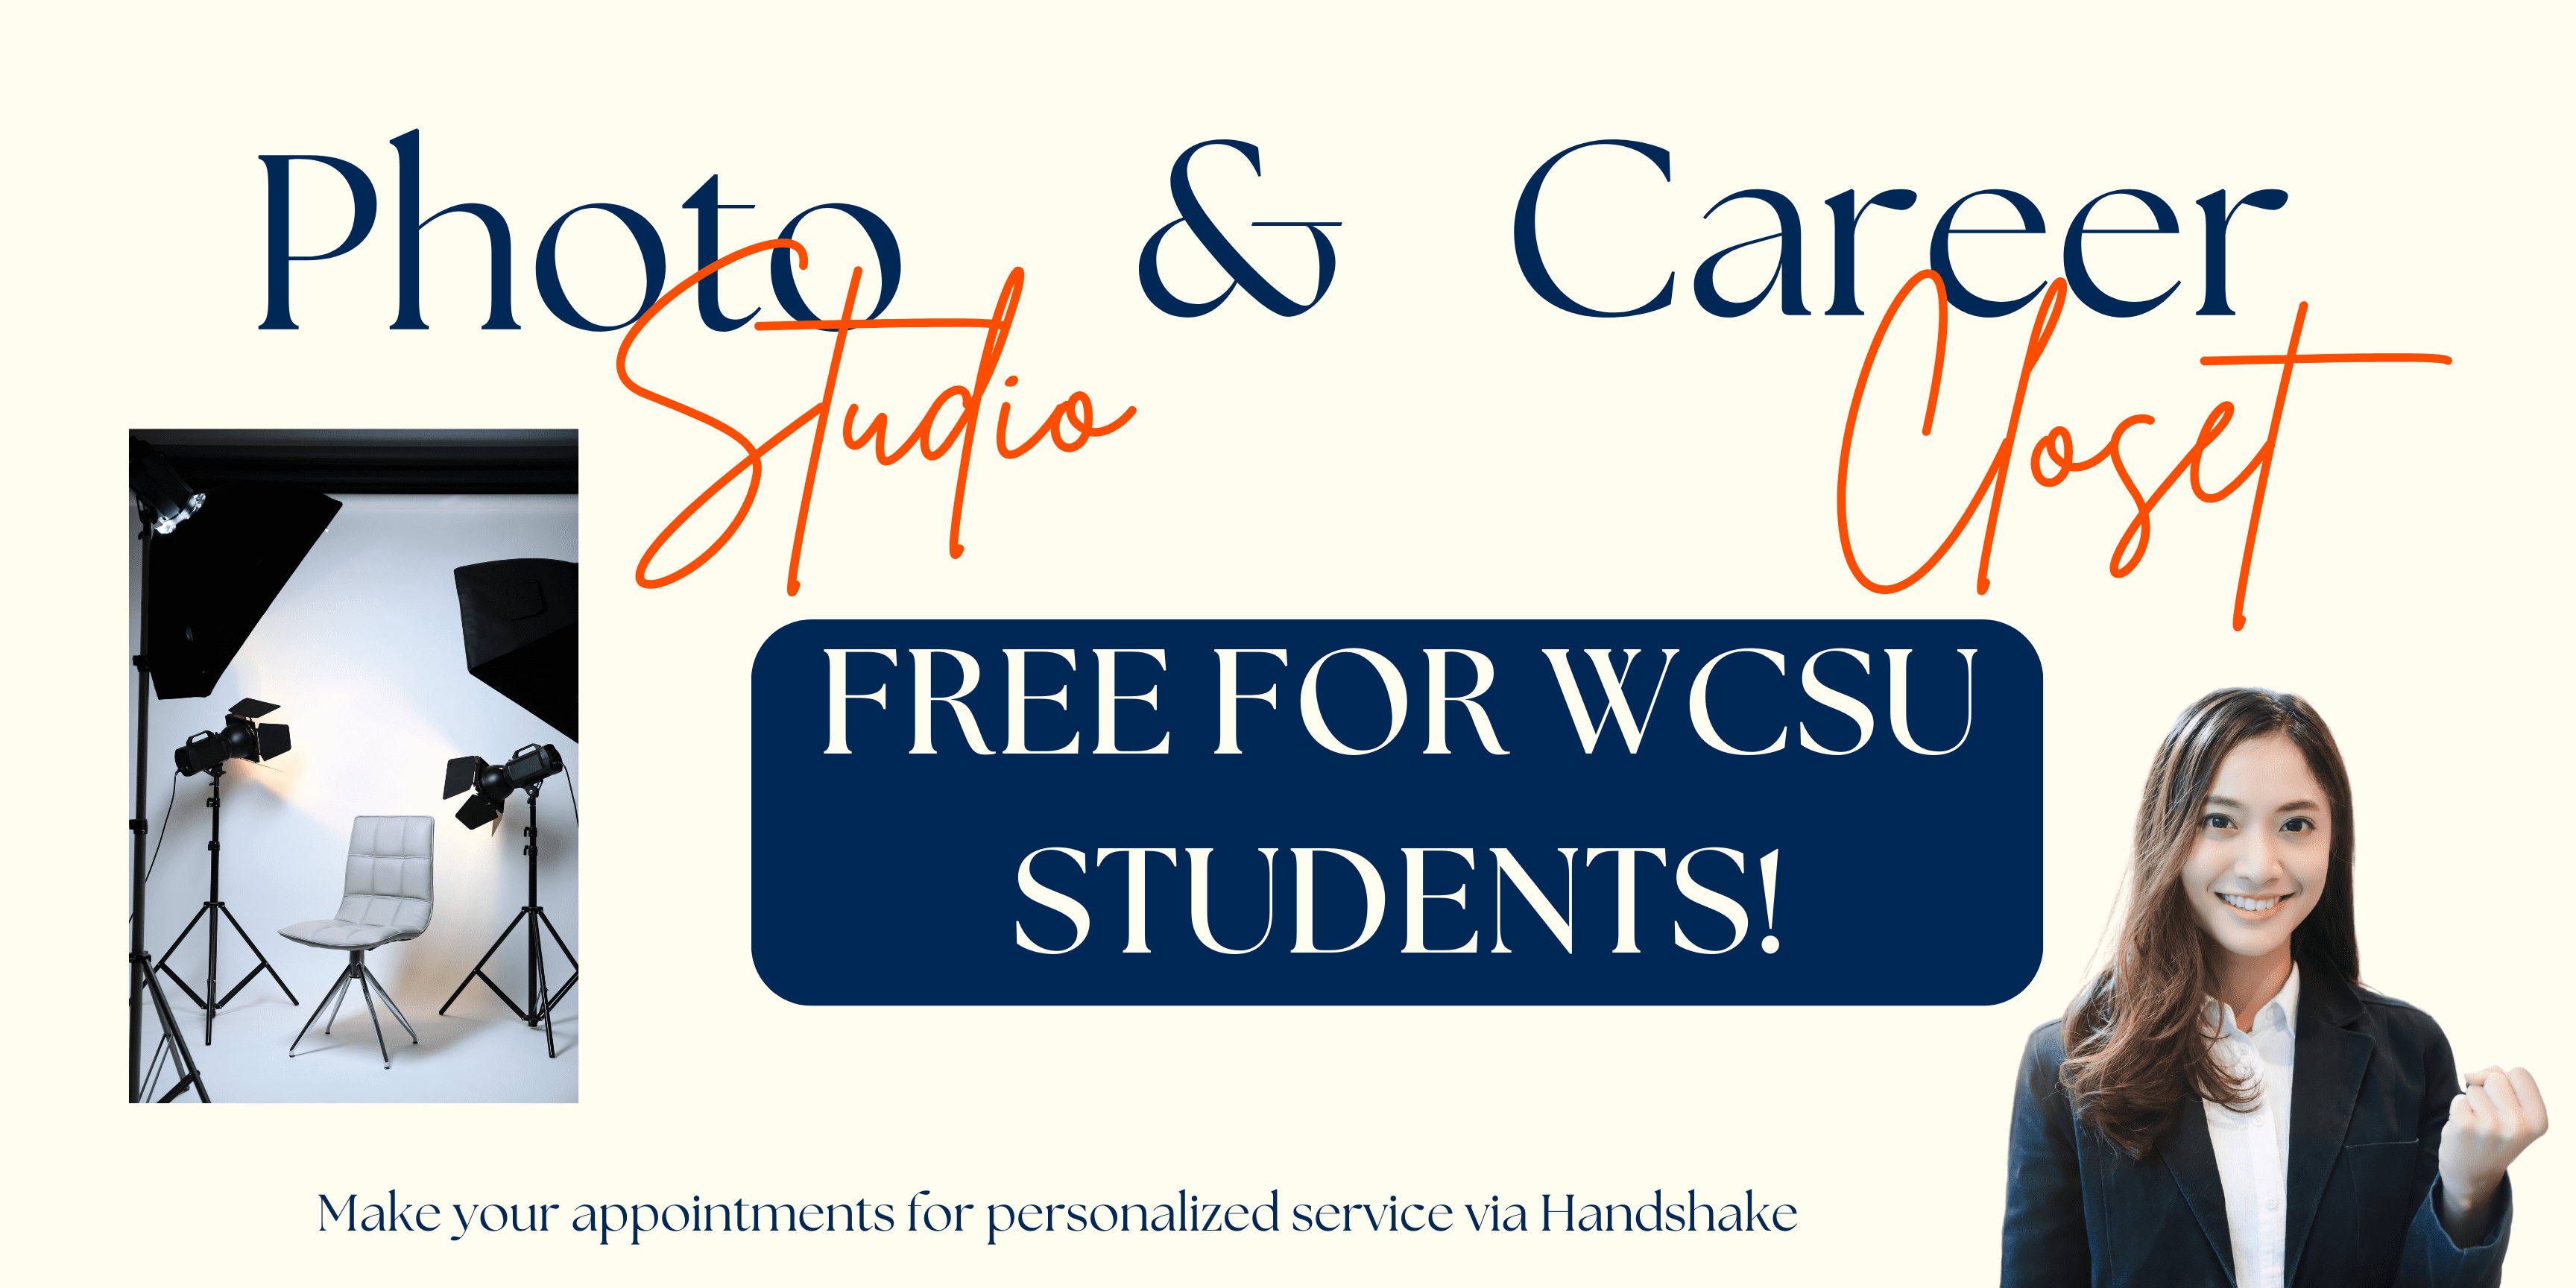 Photo Studio & Career Closet (Free for WCSU Students) Page